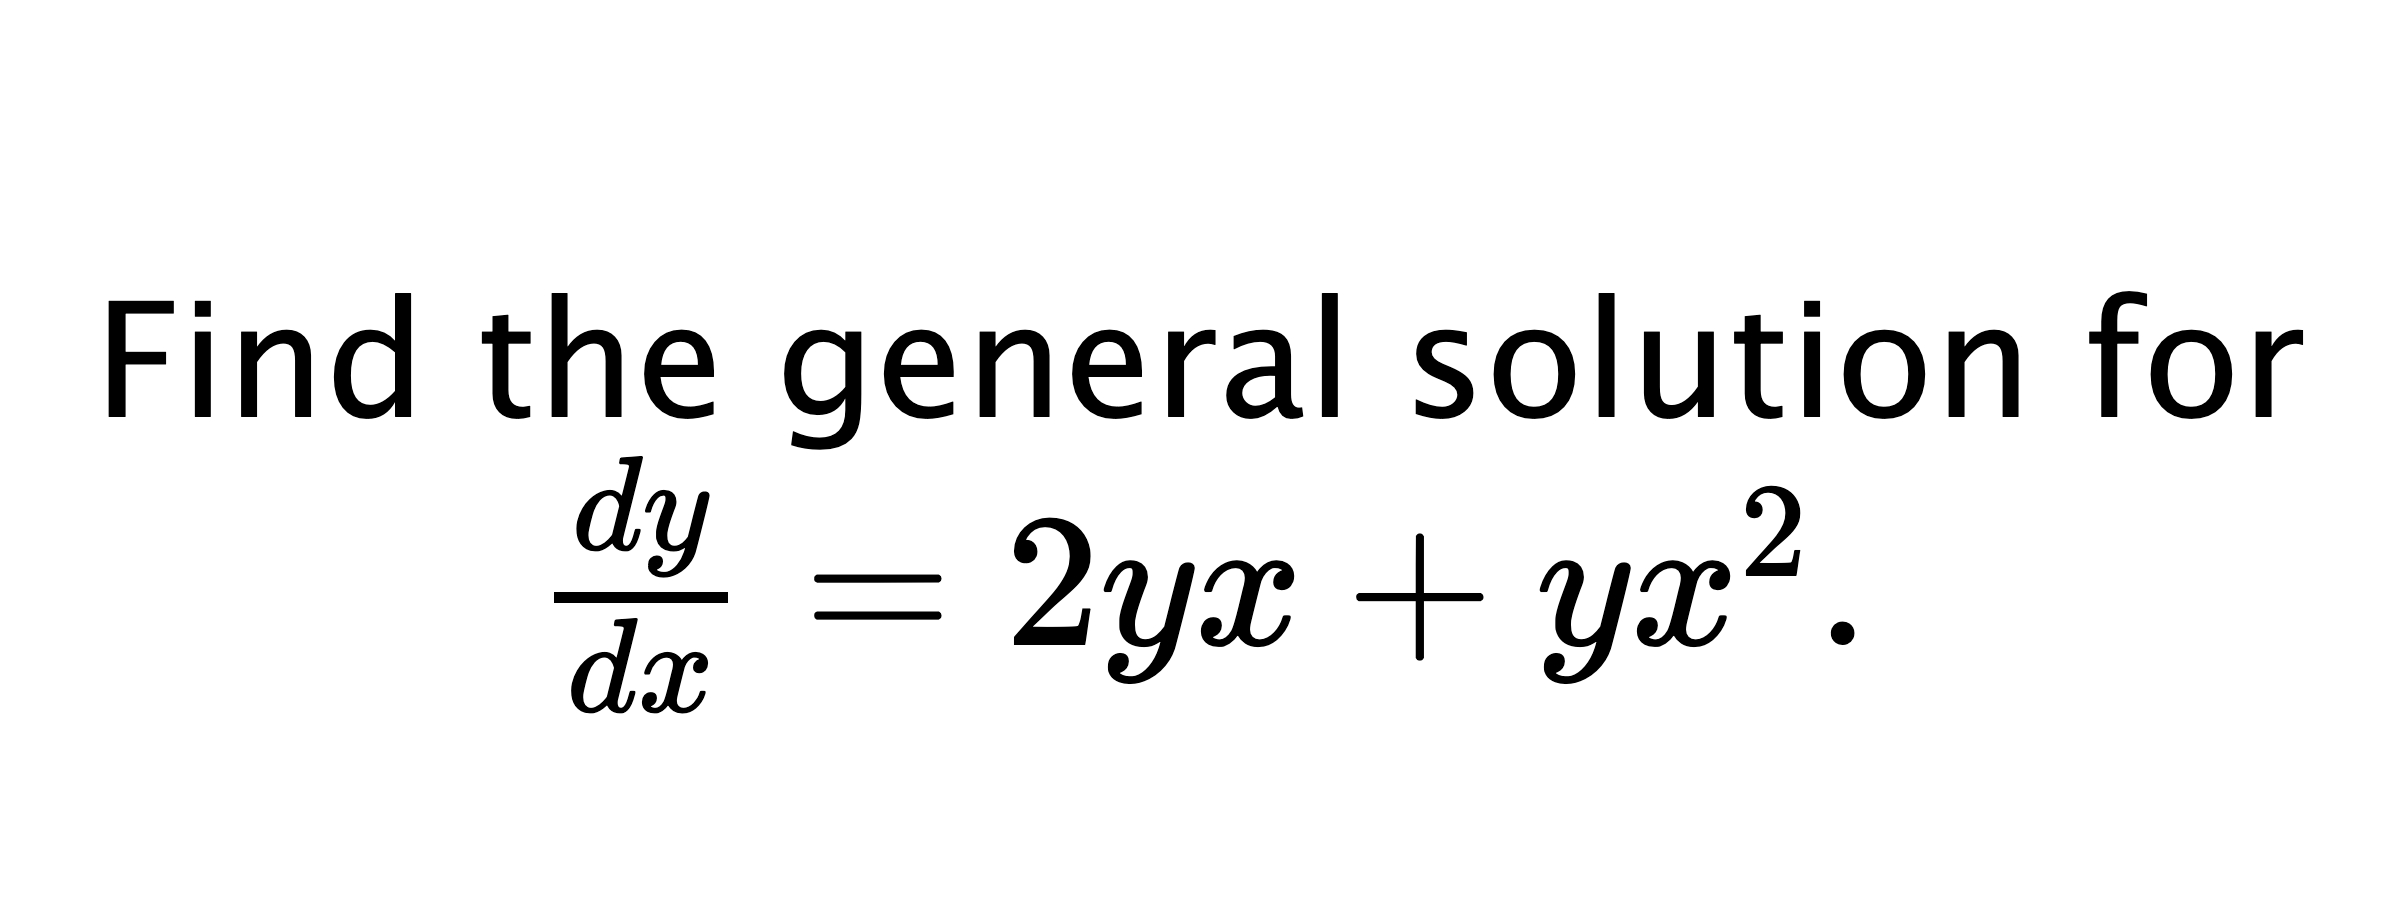  Find the general solution for $ \frac{dy}{dx}=2yx+yx^{2}. $